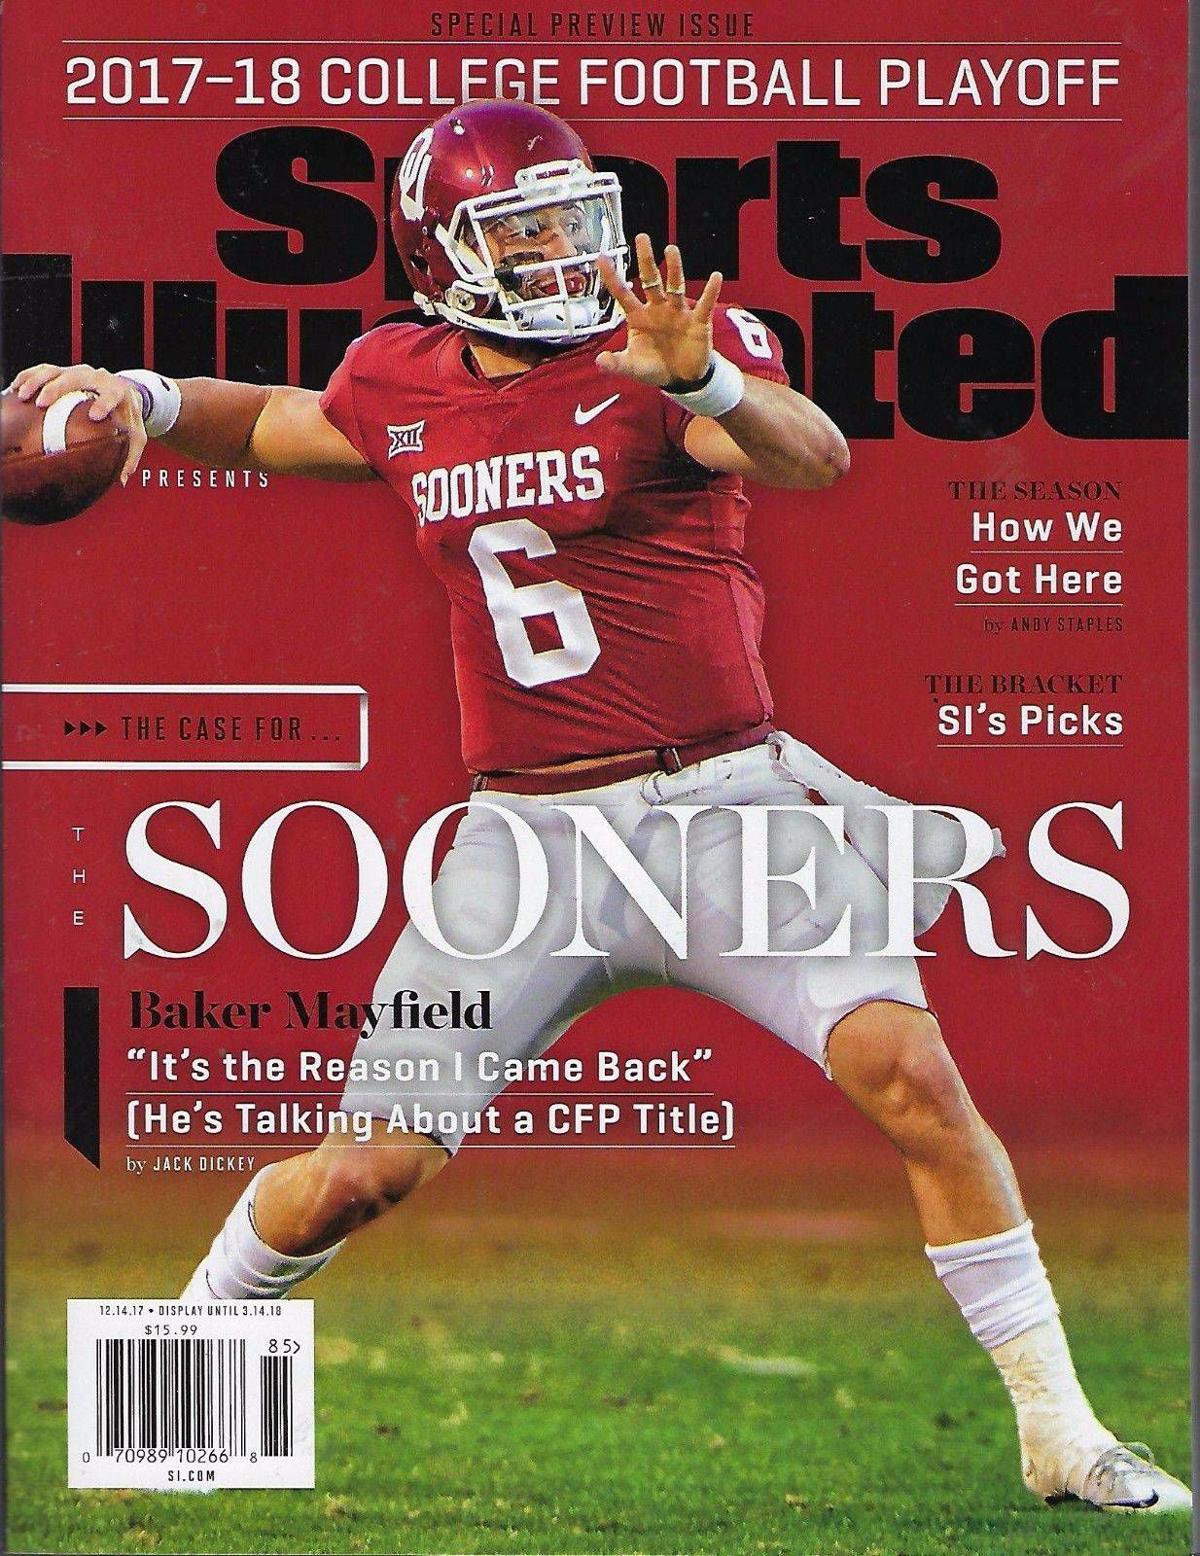 OU Sports Illustrated covers